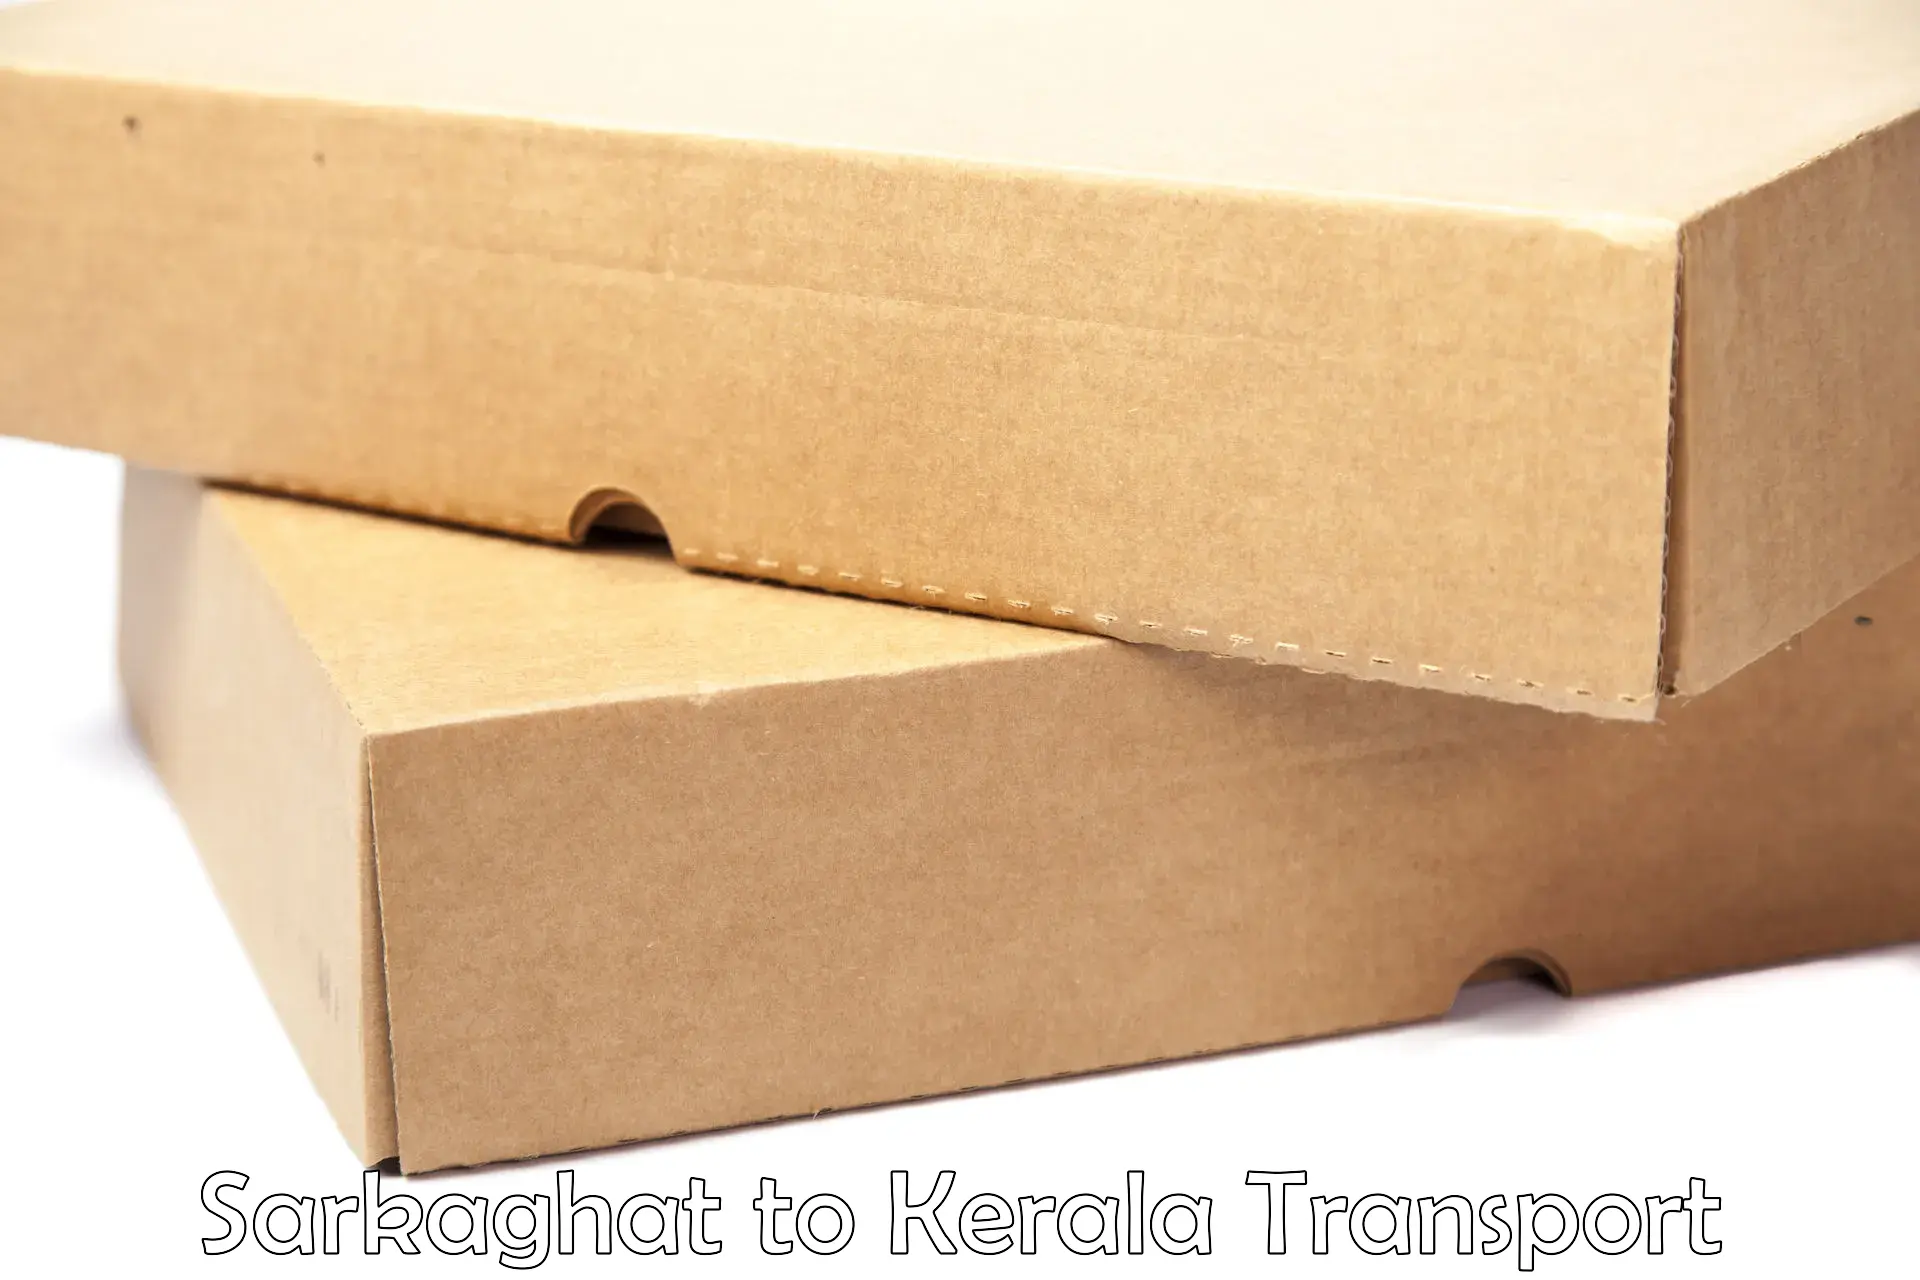 Air freight transport services Sarkaghat to Guruvayoor